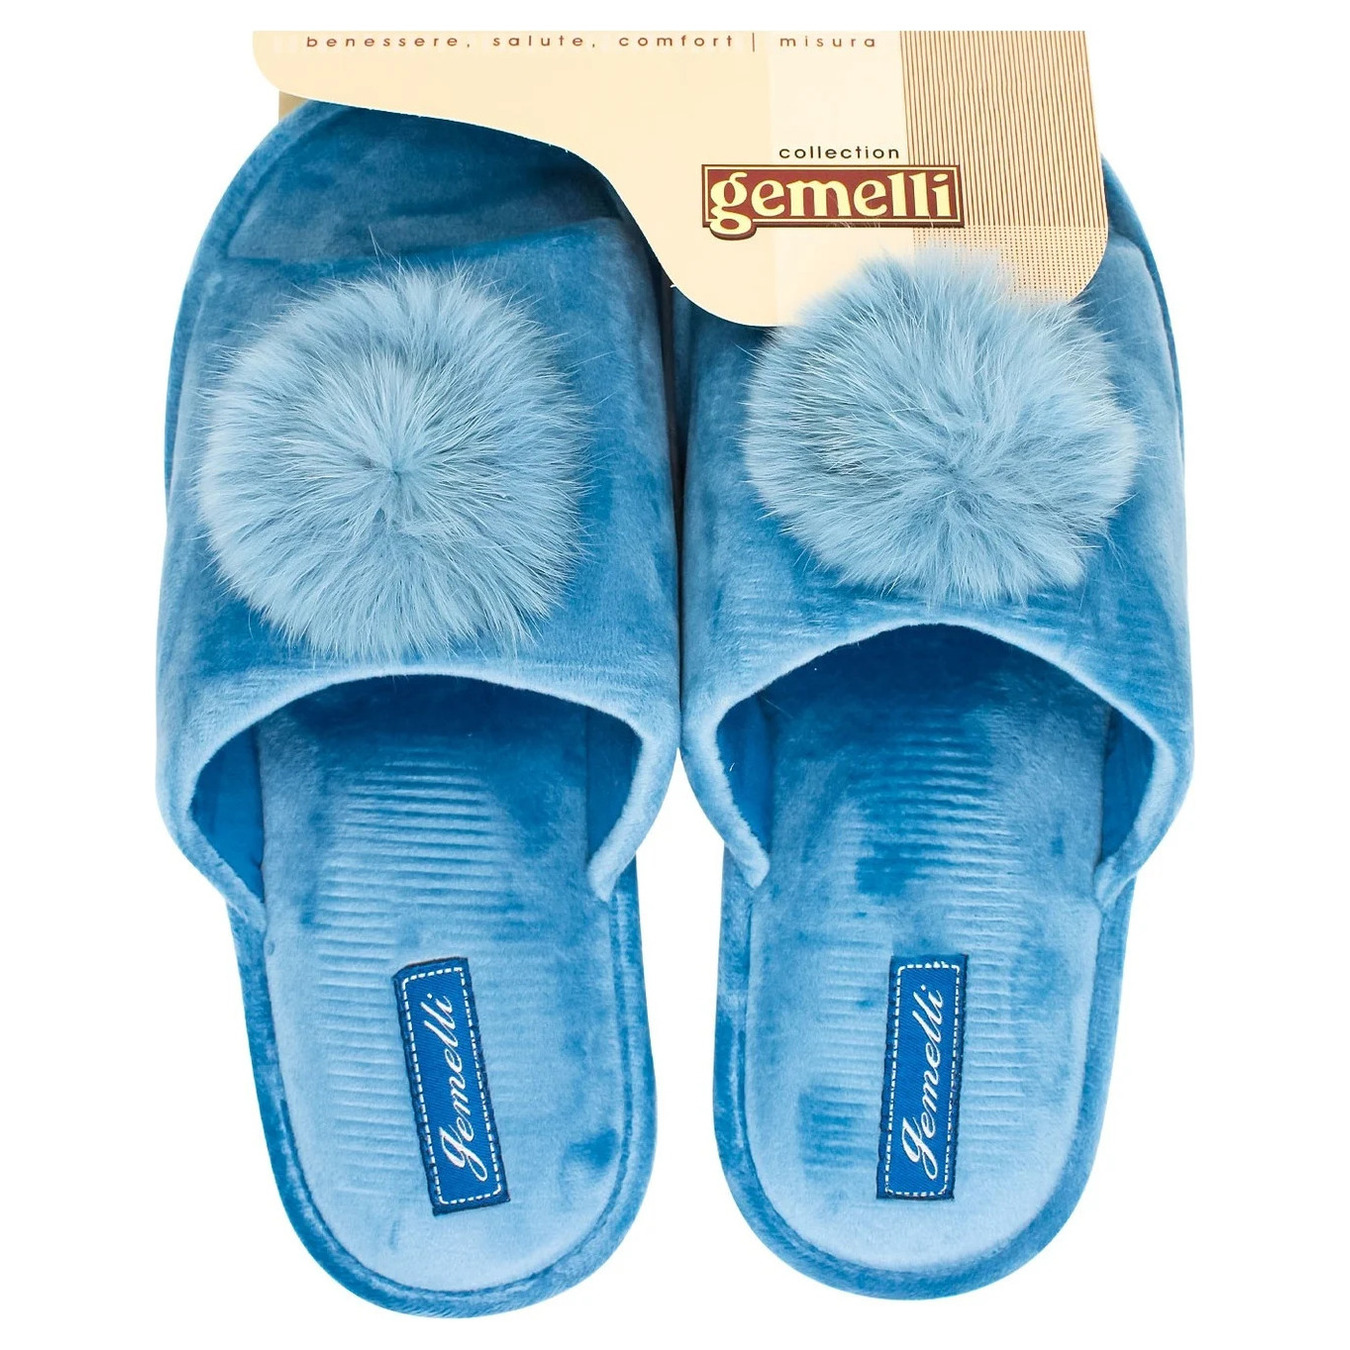 Gemelli Pukhnastyk home shoes for women 36-41 years old. 2